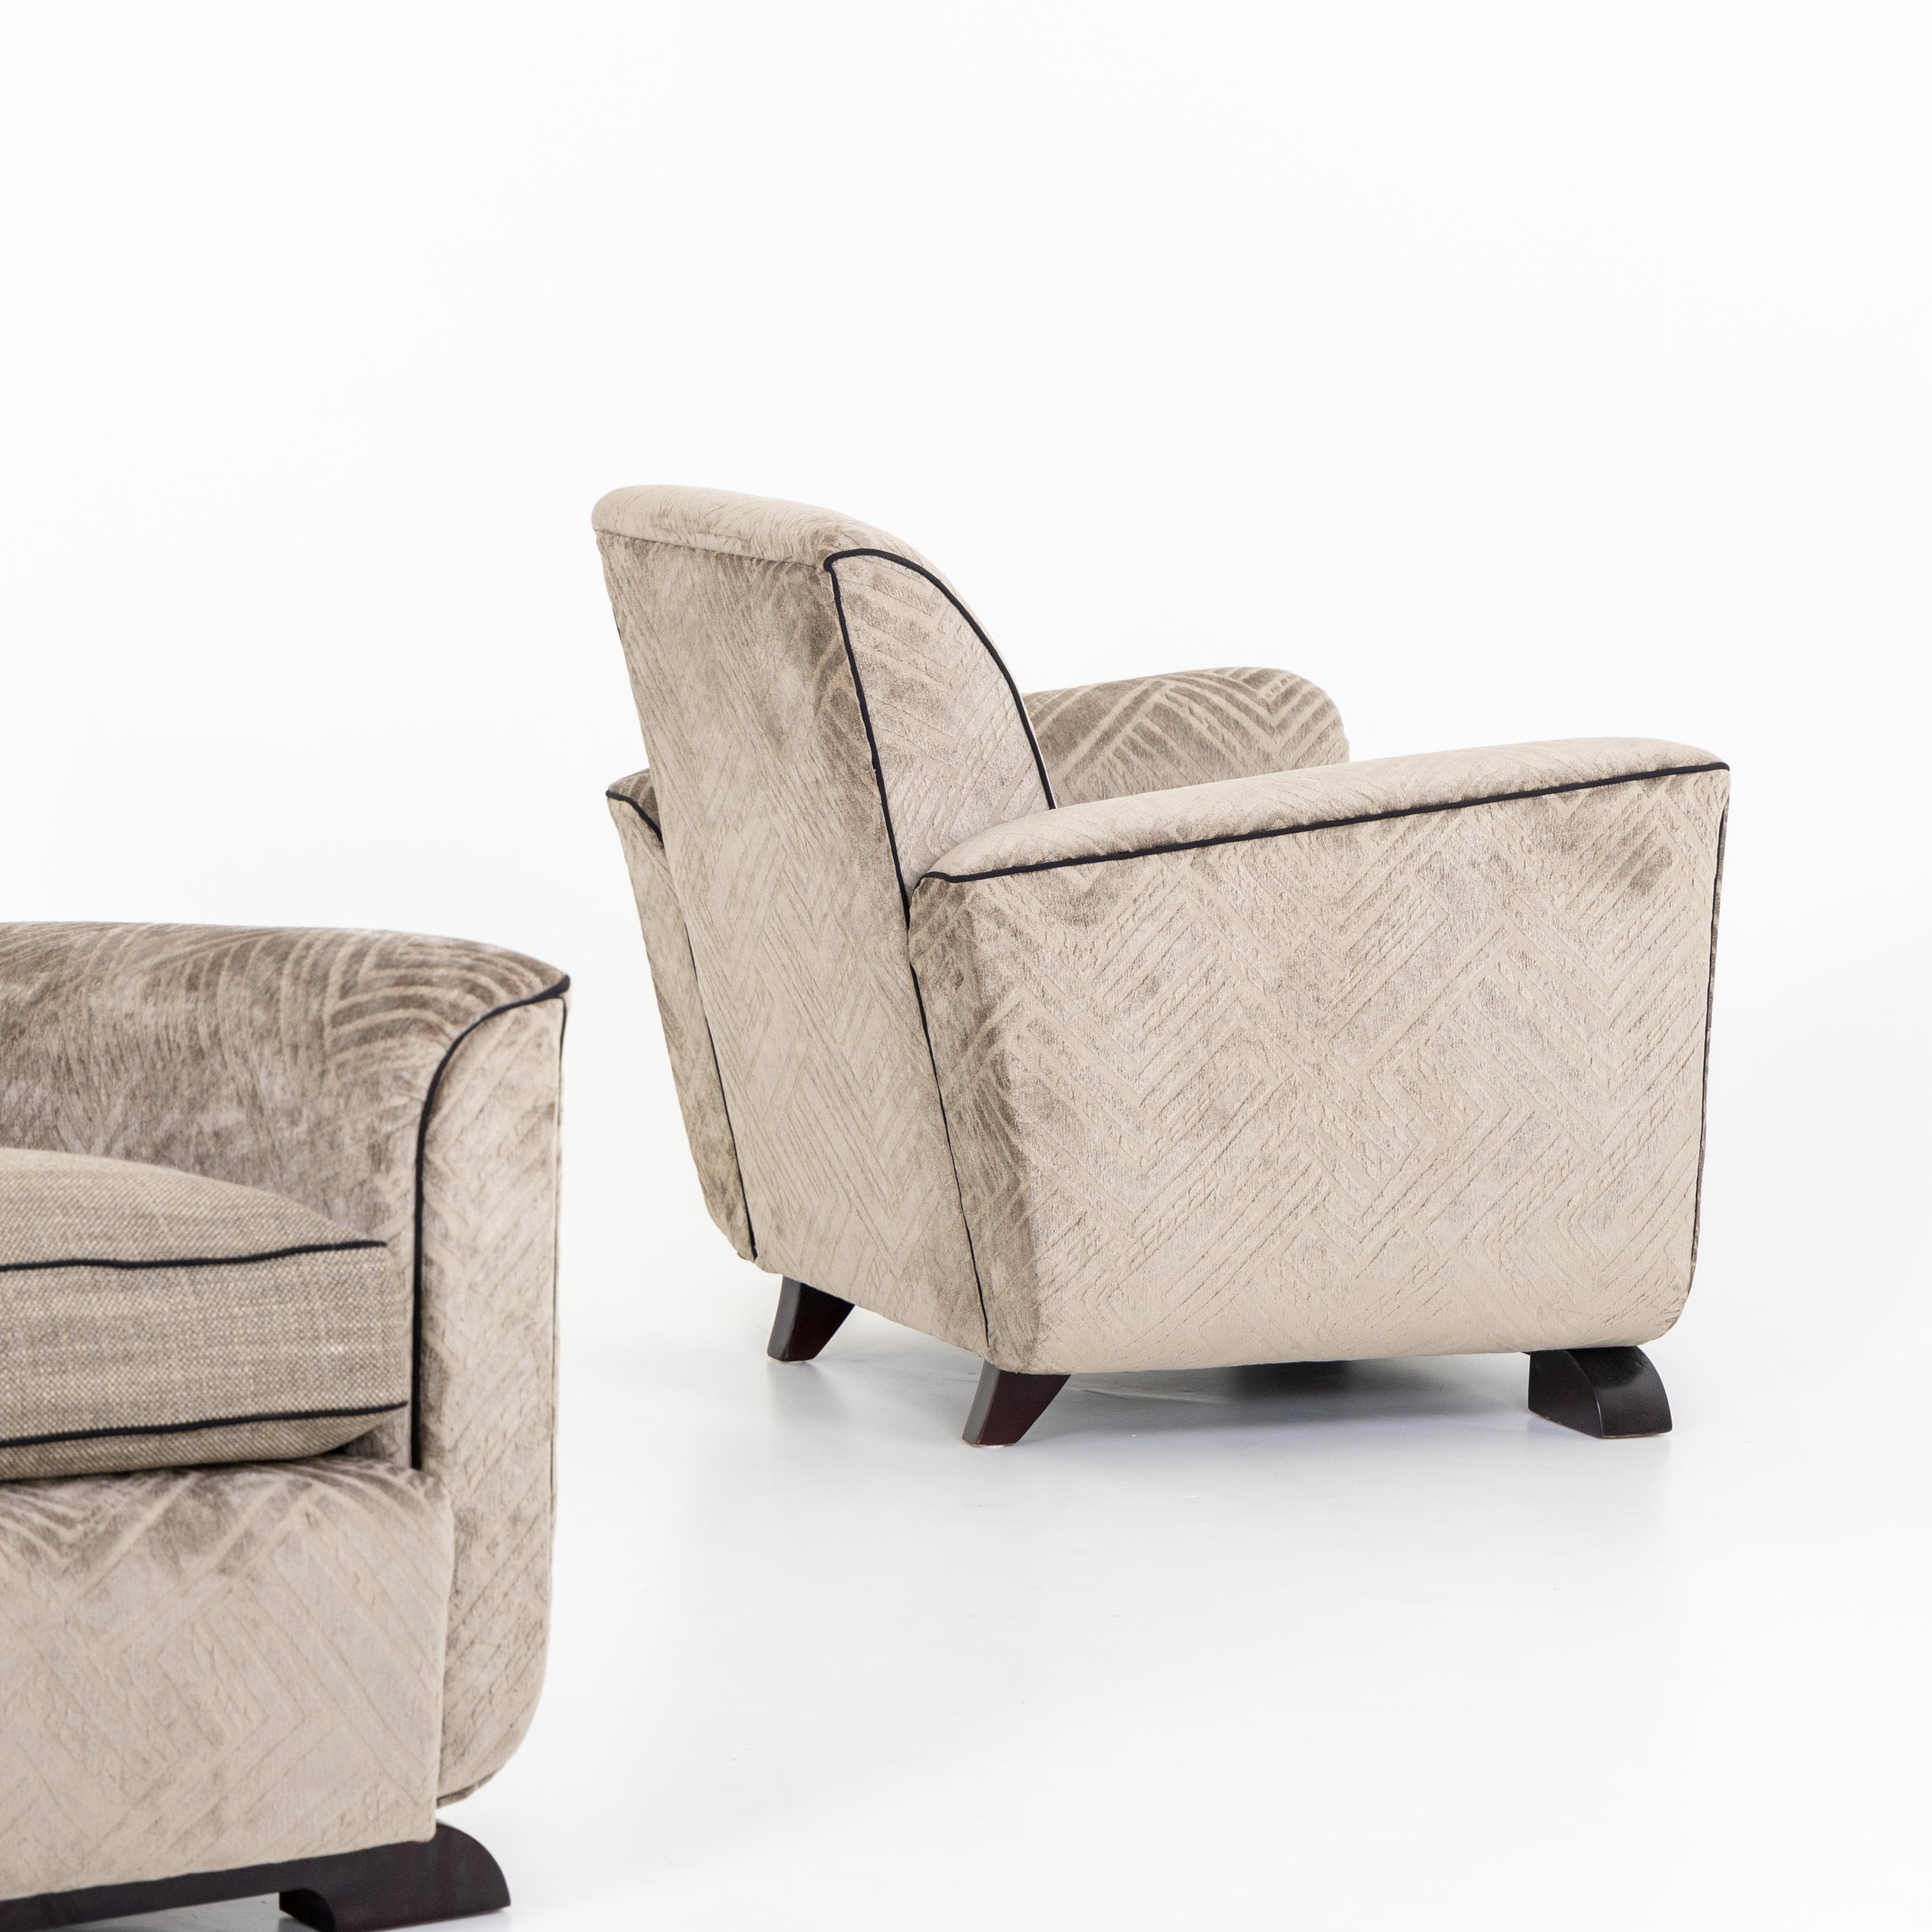 Pair of Art Deco Lounge Chairs, France, 1920s For Sale 1